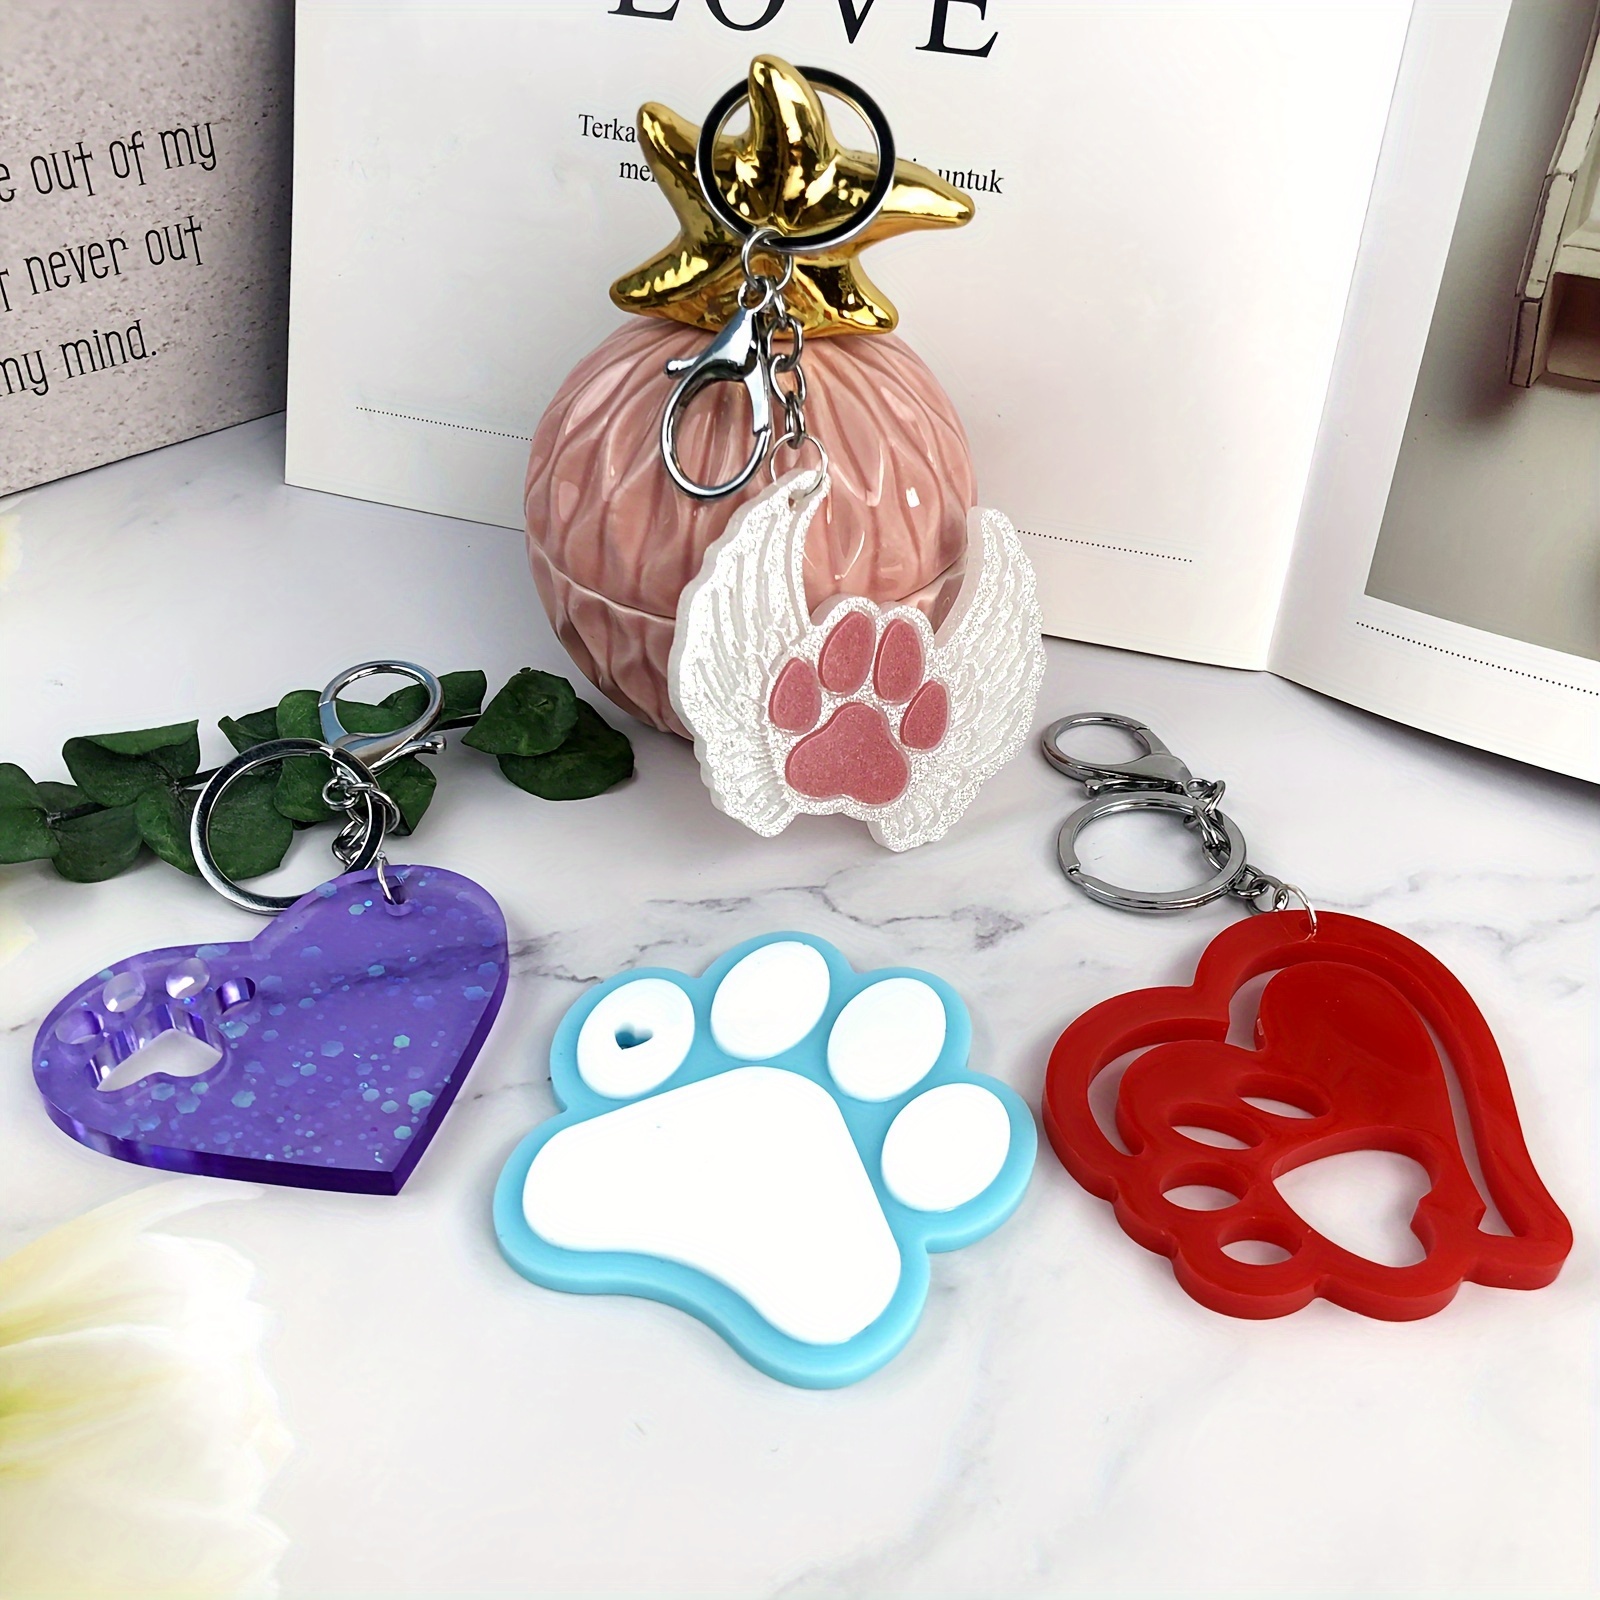 

Dog Paw & Heart Wing Shaped Silicone Resin Mold For Diy Keychains, Tags - Large Dog Paw Print & Heart Designs For Epoxy Crafts, Perfect For Christmas, Valentine's, Mother's Day, Graduation Gifts - 1pc